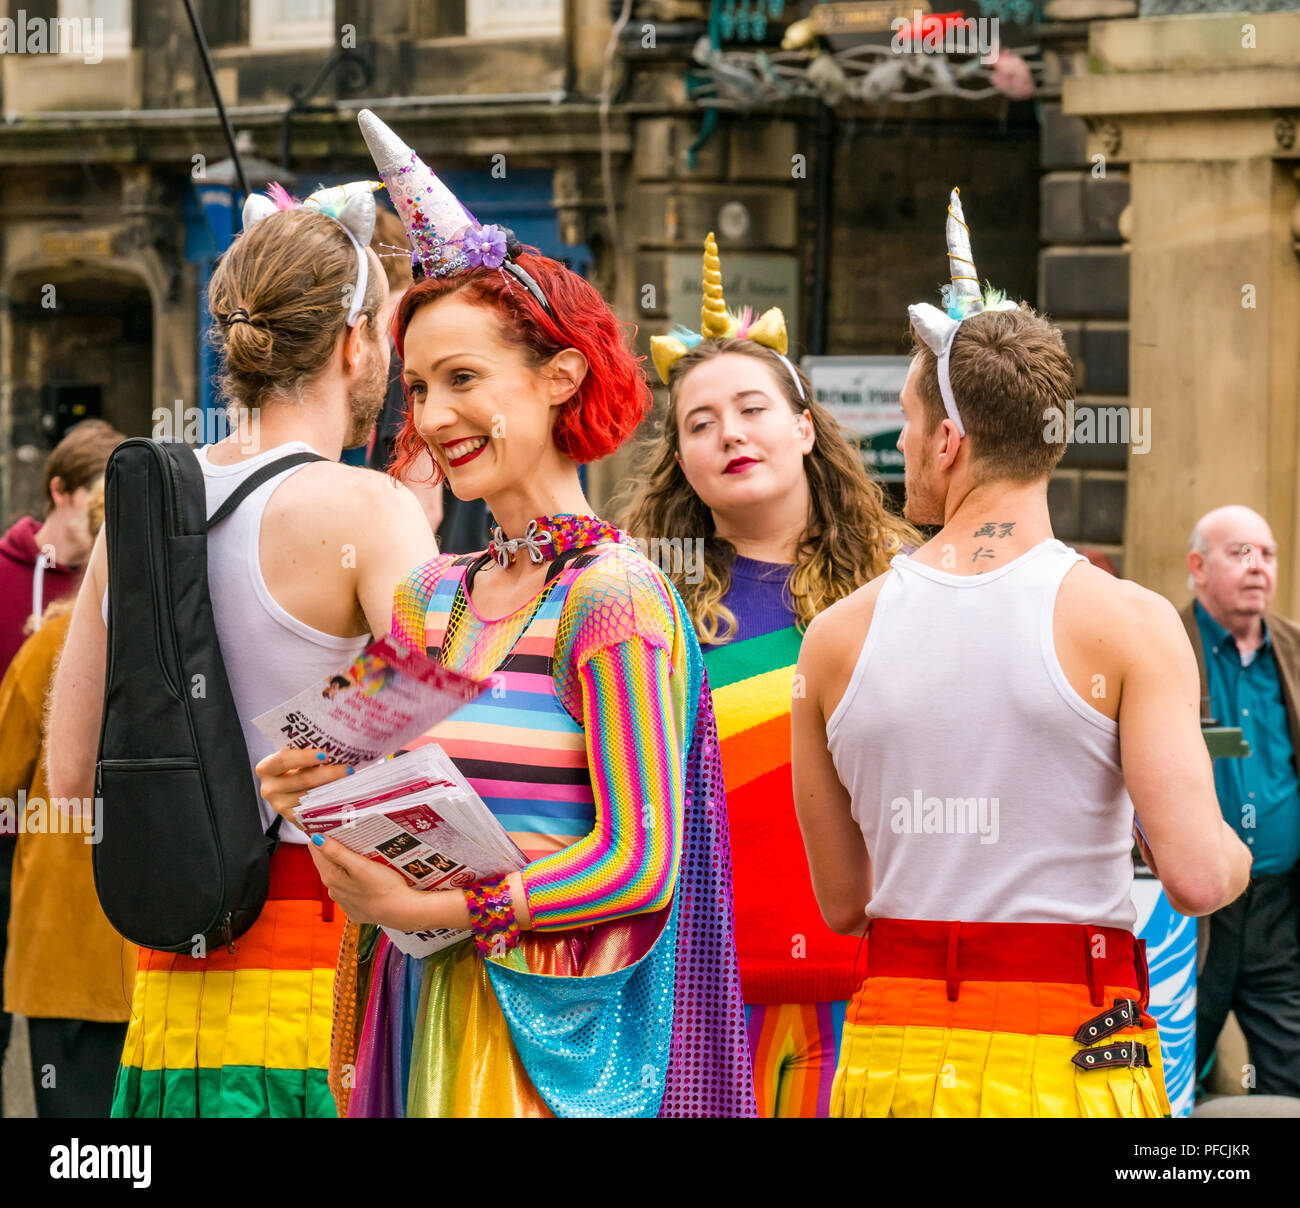 Edinburgh Fringe, Edinburgh, Scotland, UK. 21st August 2018. Fringe goers and festival performers throng the Virgin Money sponsored street venue on the Royal Mile in the last week of the fringe festival. Fringe performers in colourful costumes from a show called Broken Romantics had out flyers to people passing by Stock Photo